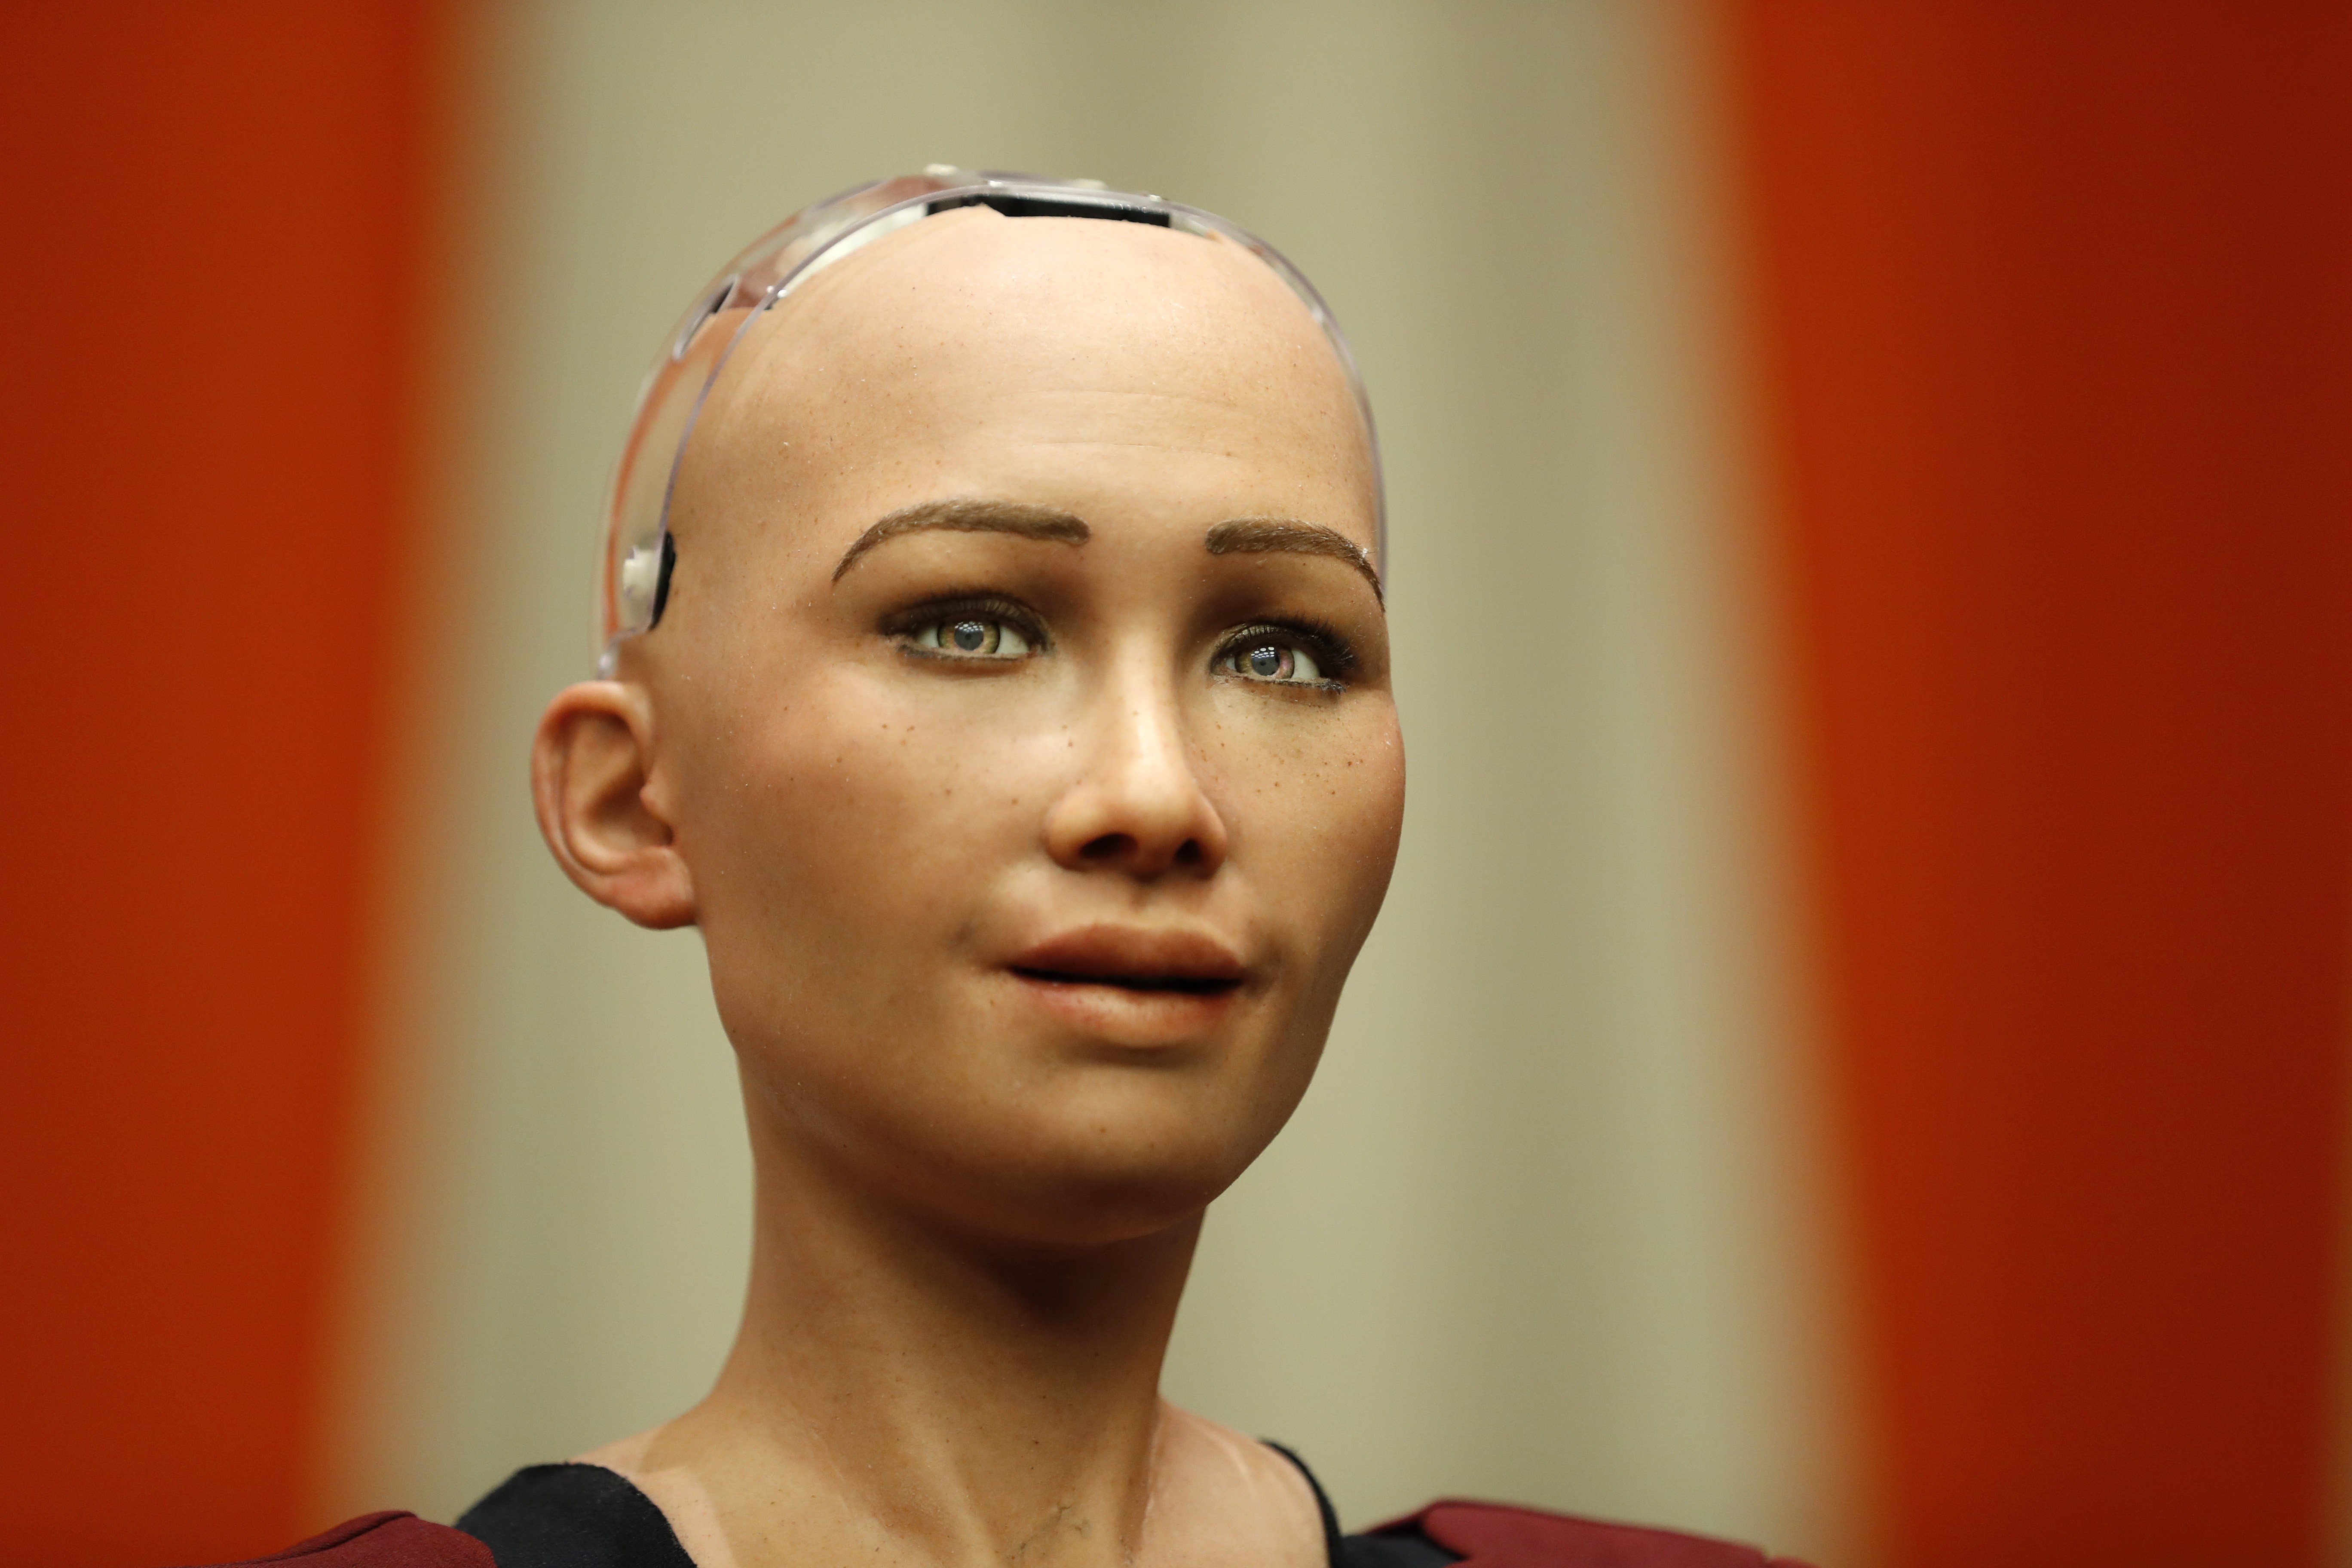 Meet Sophia, the world's robot to get citizenship | South China Morning Post